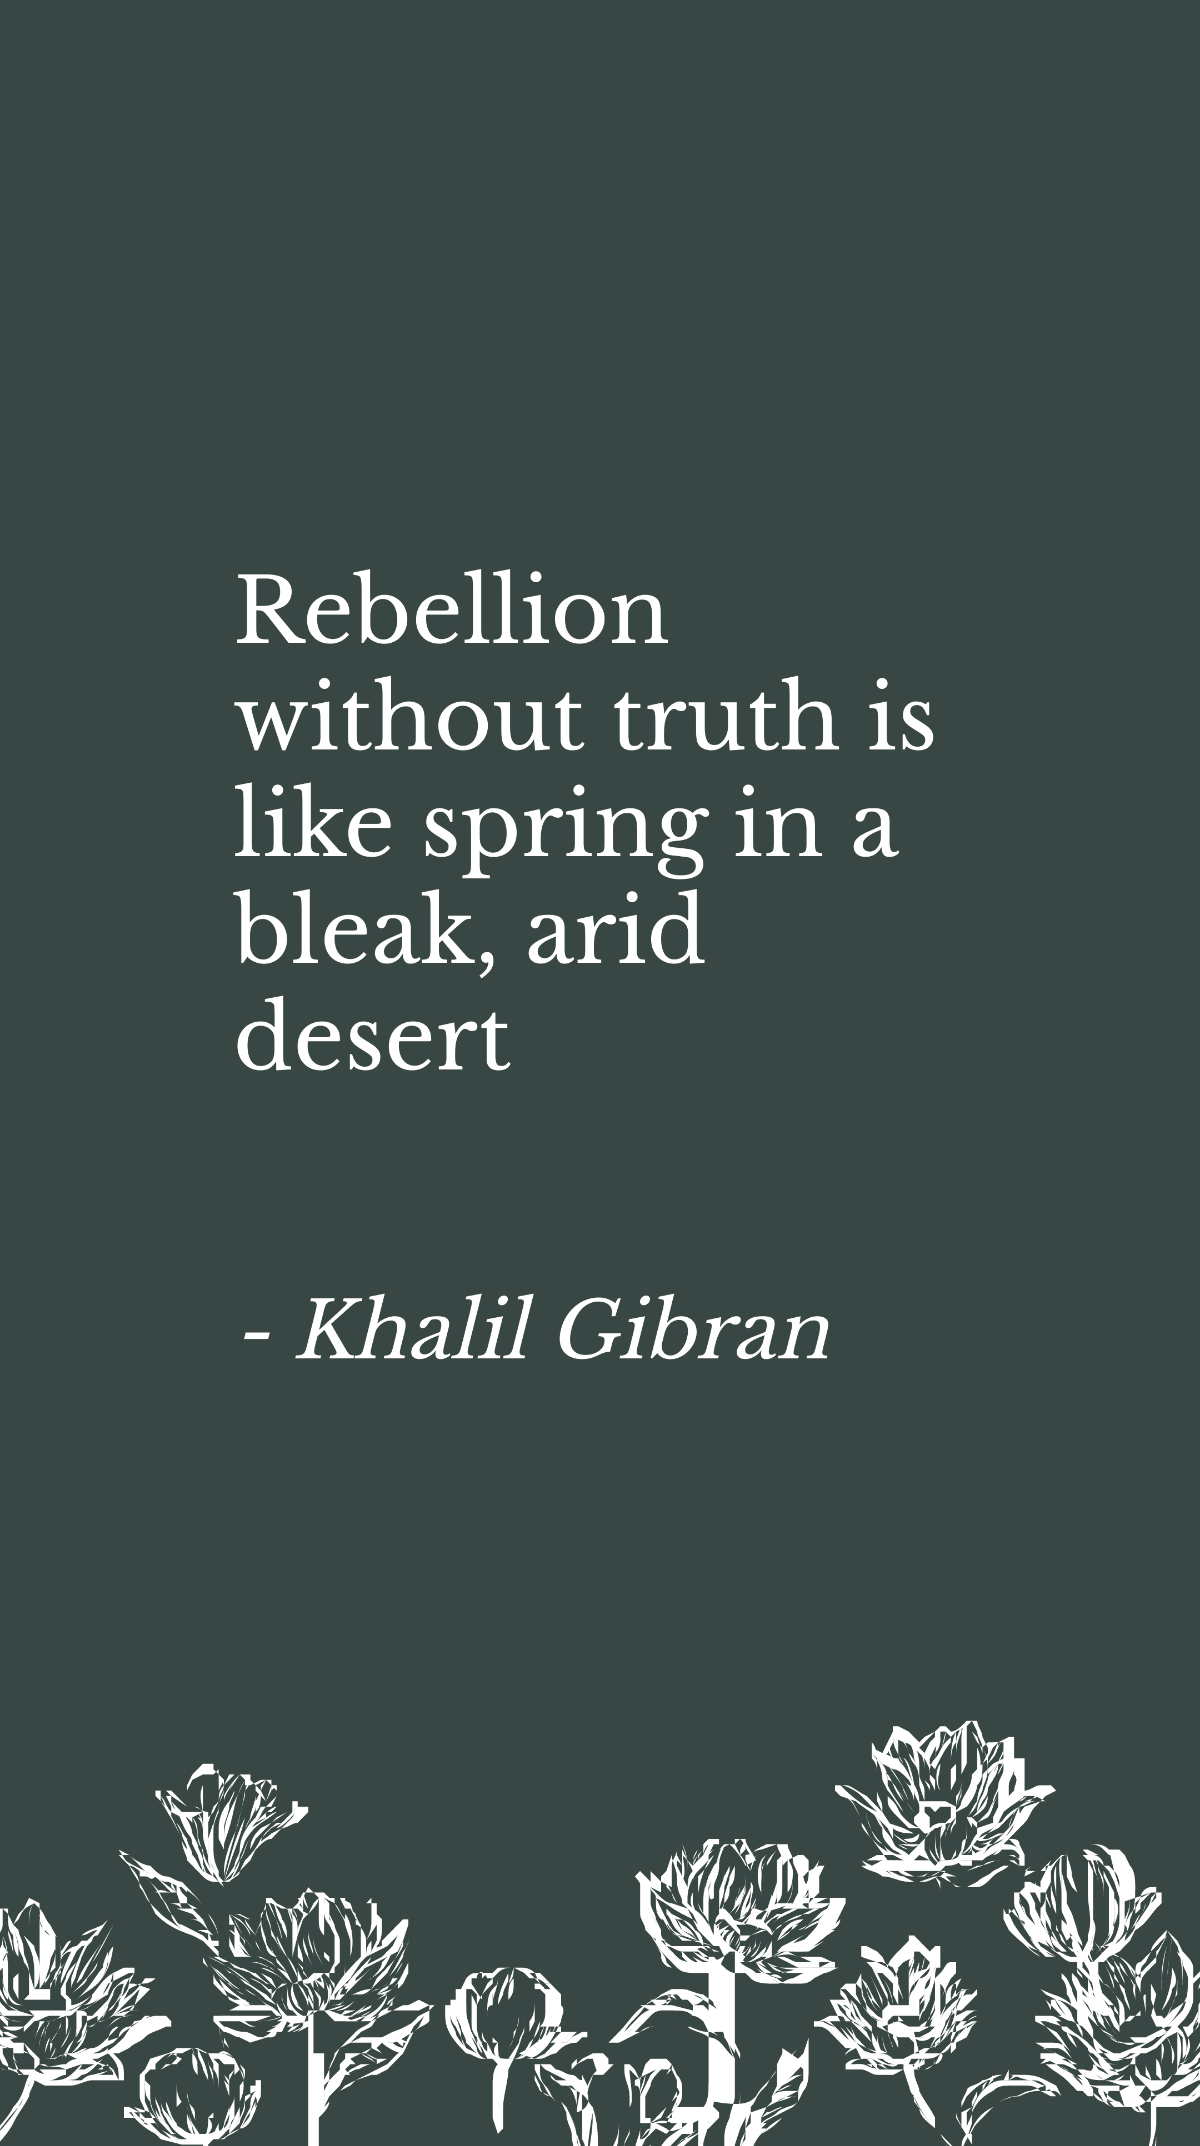 Khalil Gibran - Rebellion without truth is like spring in a bleak, arid desert Template